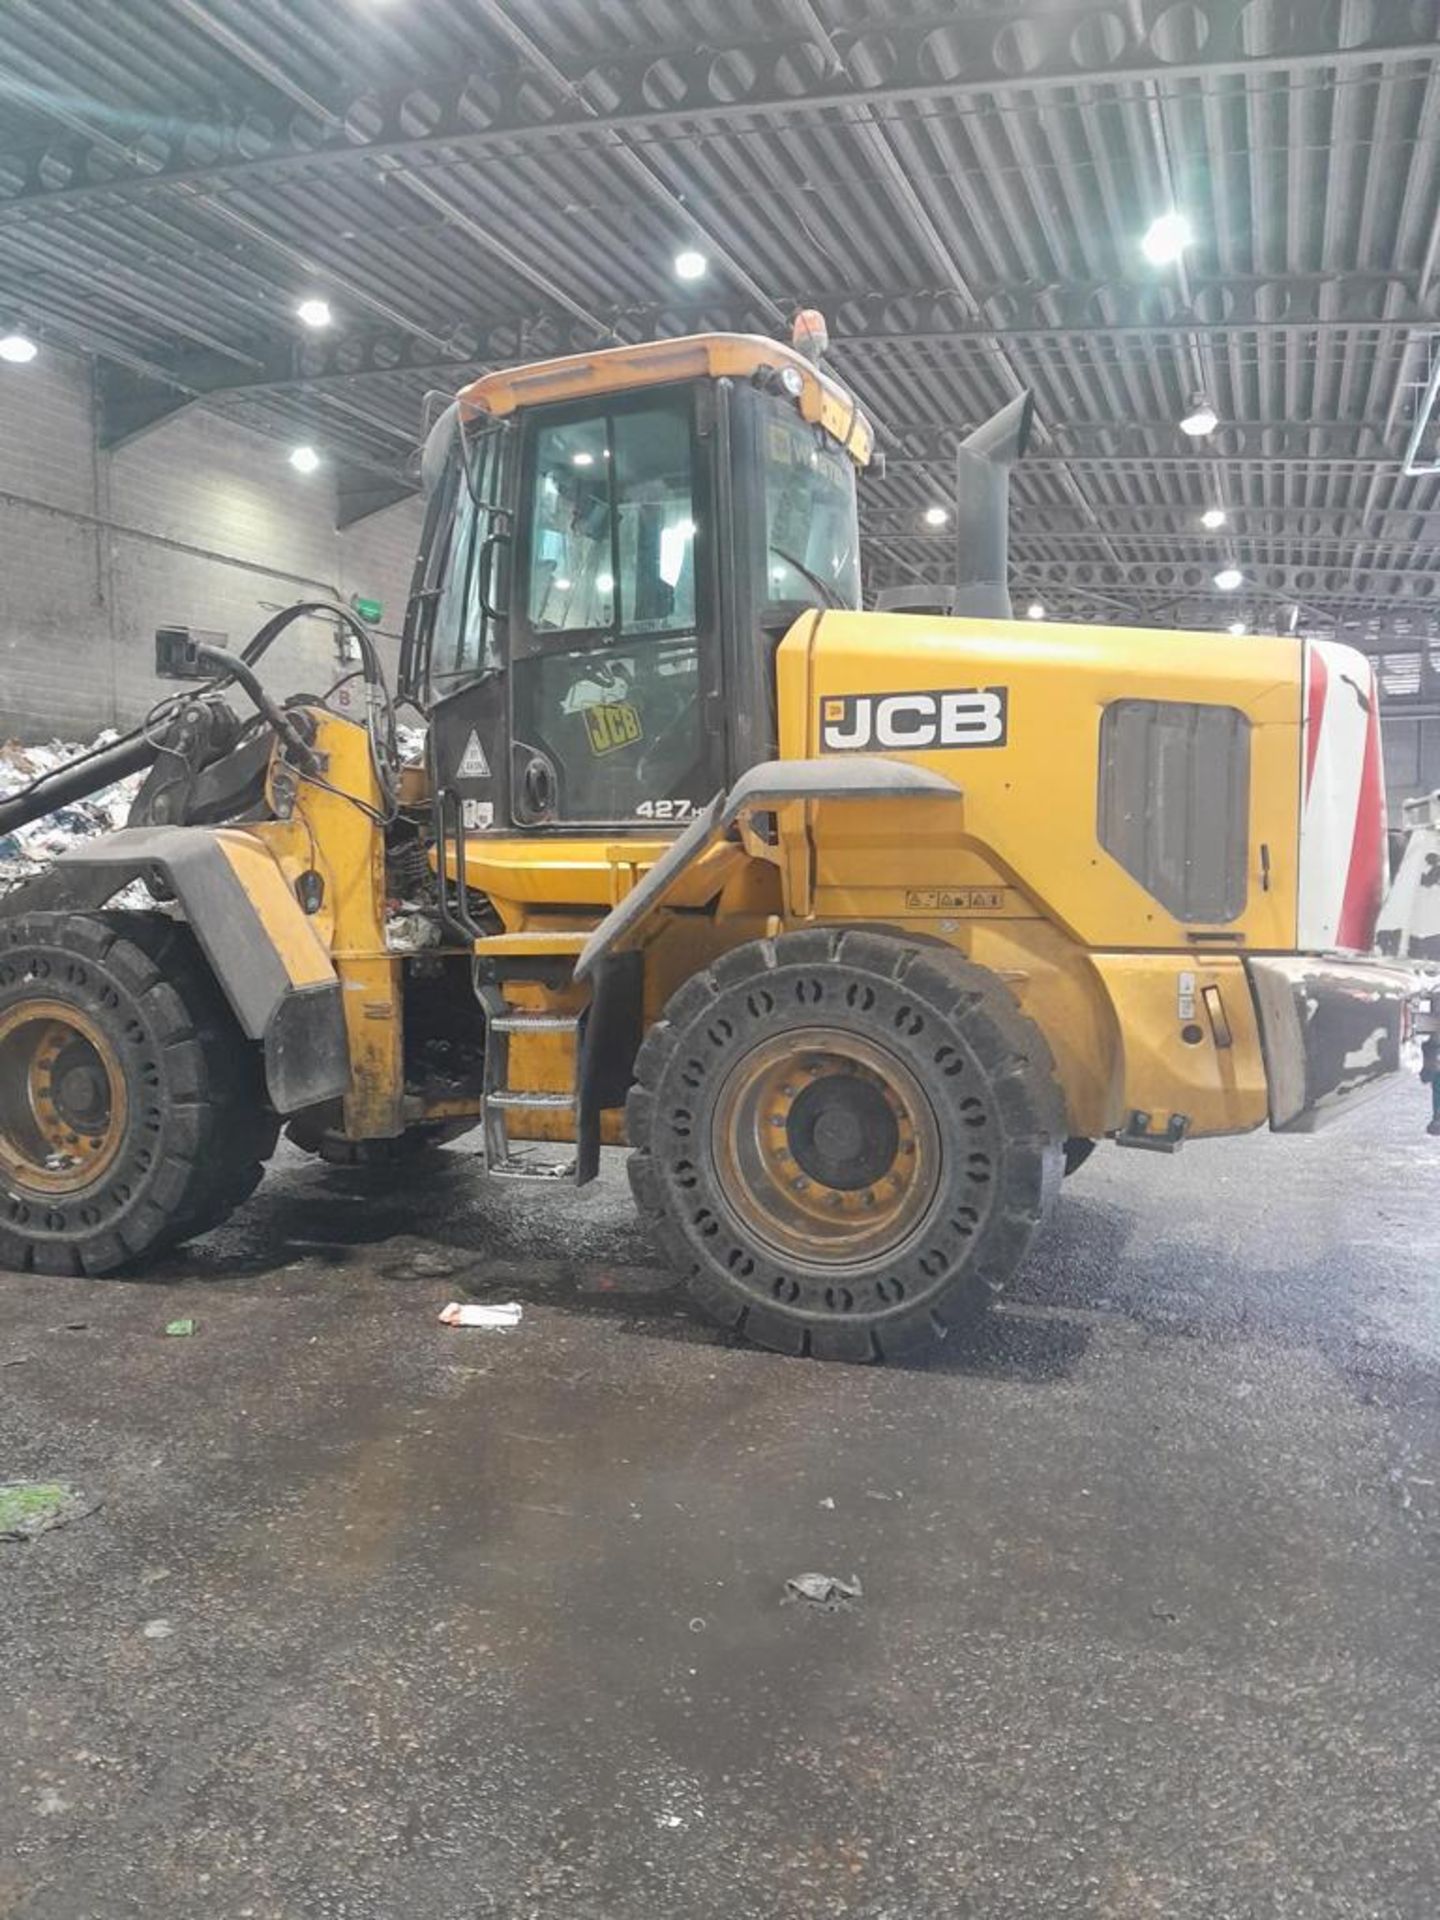 2014, JCB Waste Master on Waste Tyres under JCB Service Contract Since New (Ex-Council) - Image 2 of 5